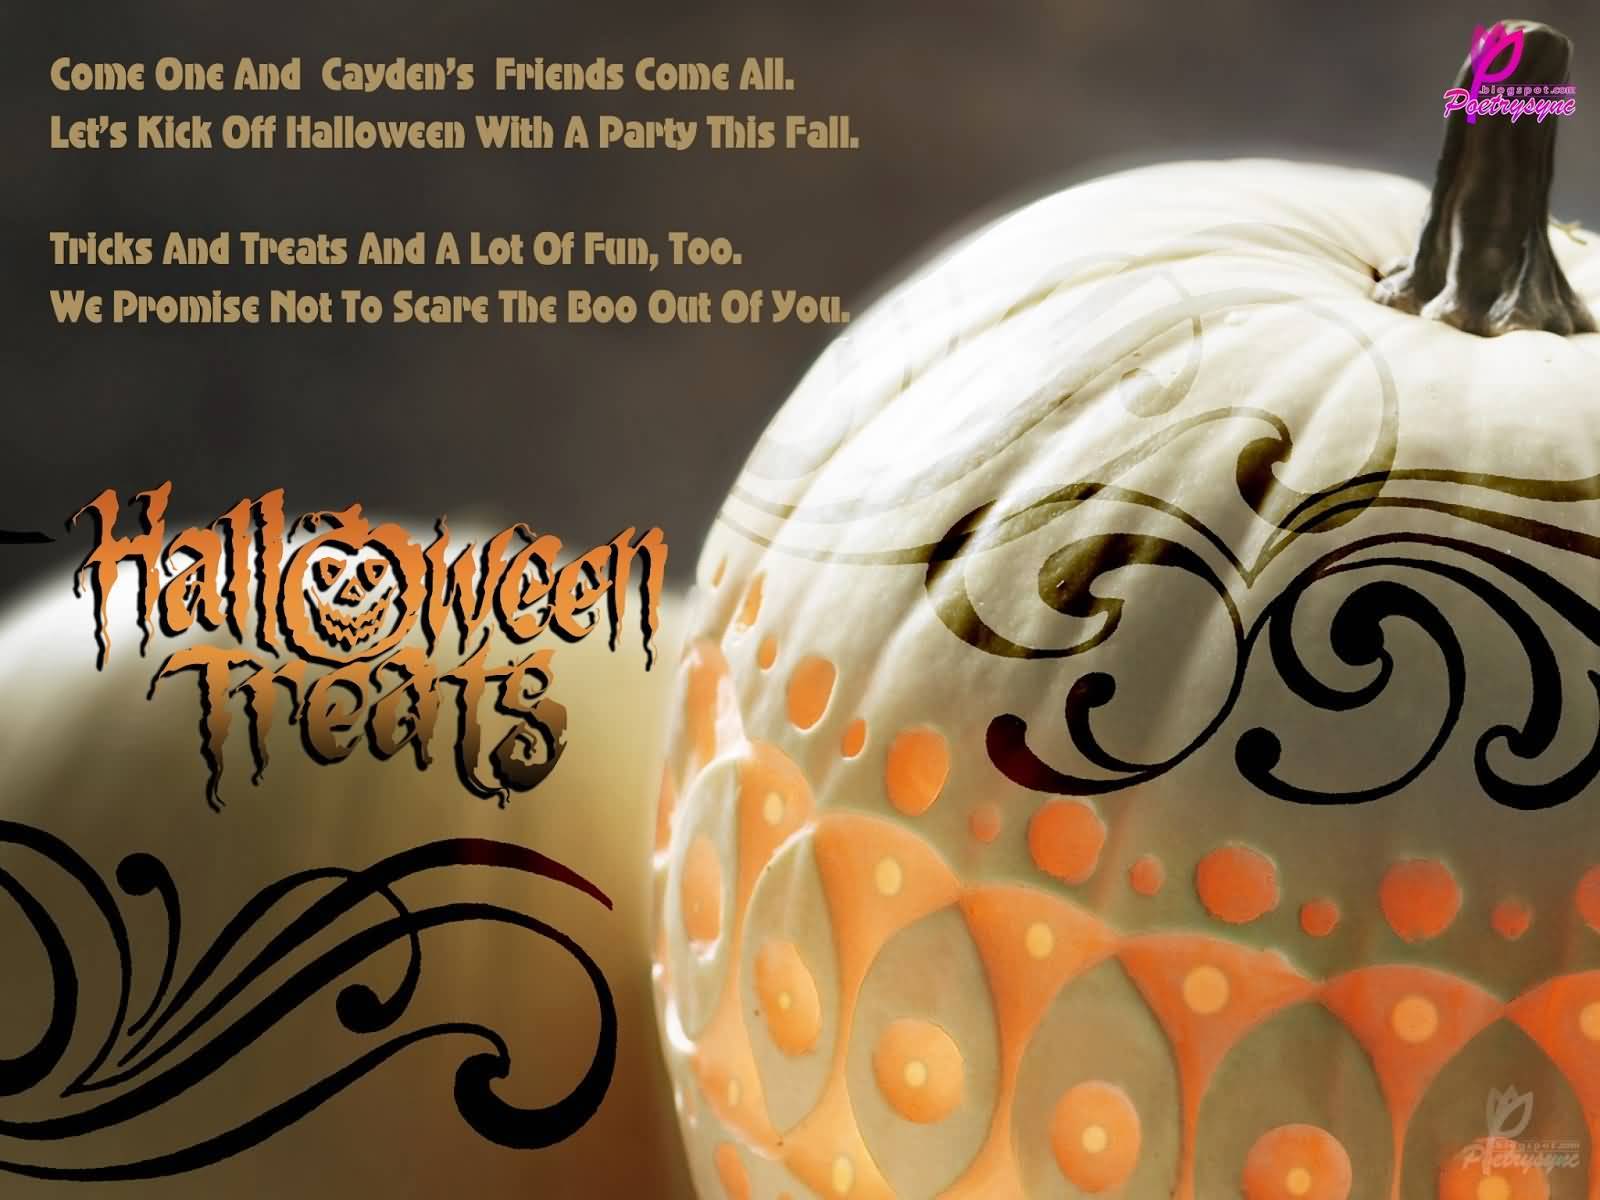 Tricks And Treats And A Lot Of Fun Too We Promise Not To Scare The Boo Out Of You Halloween Treats